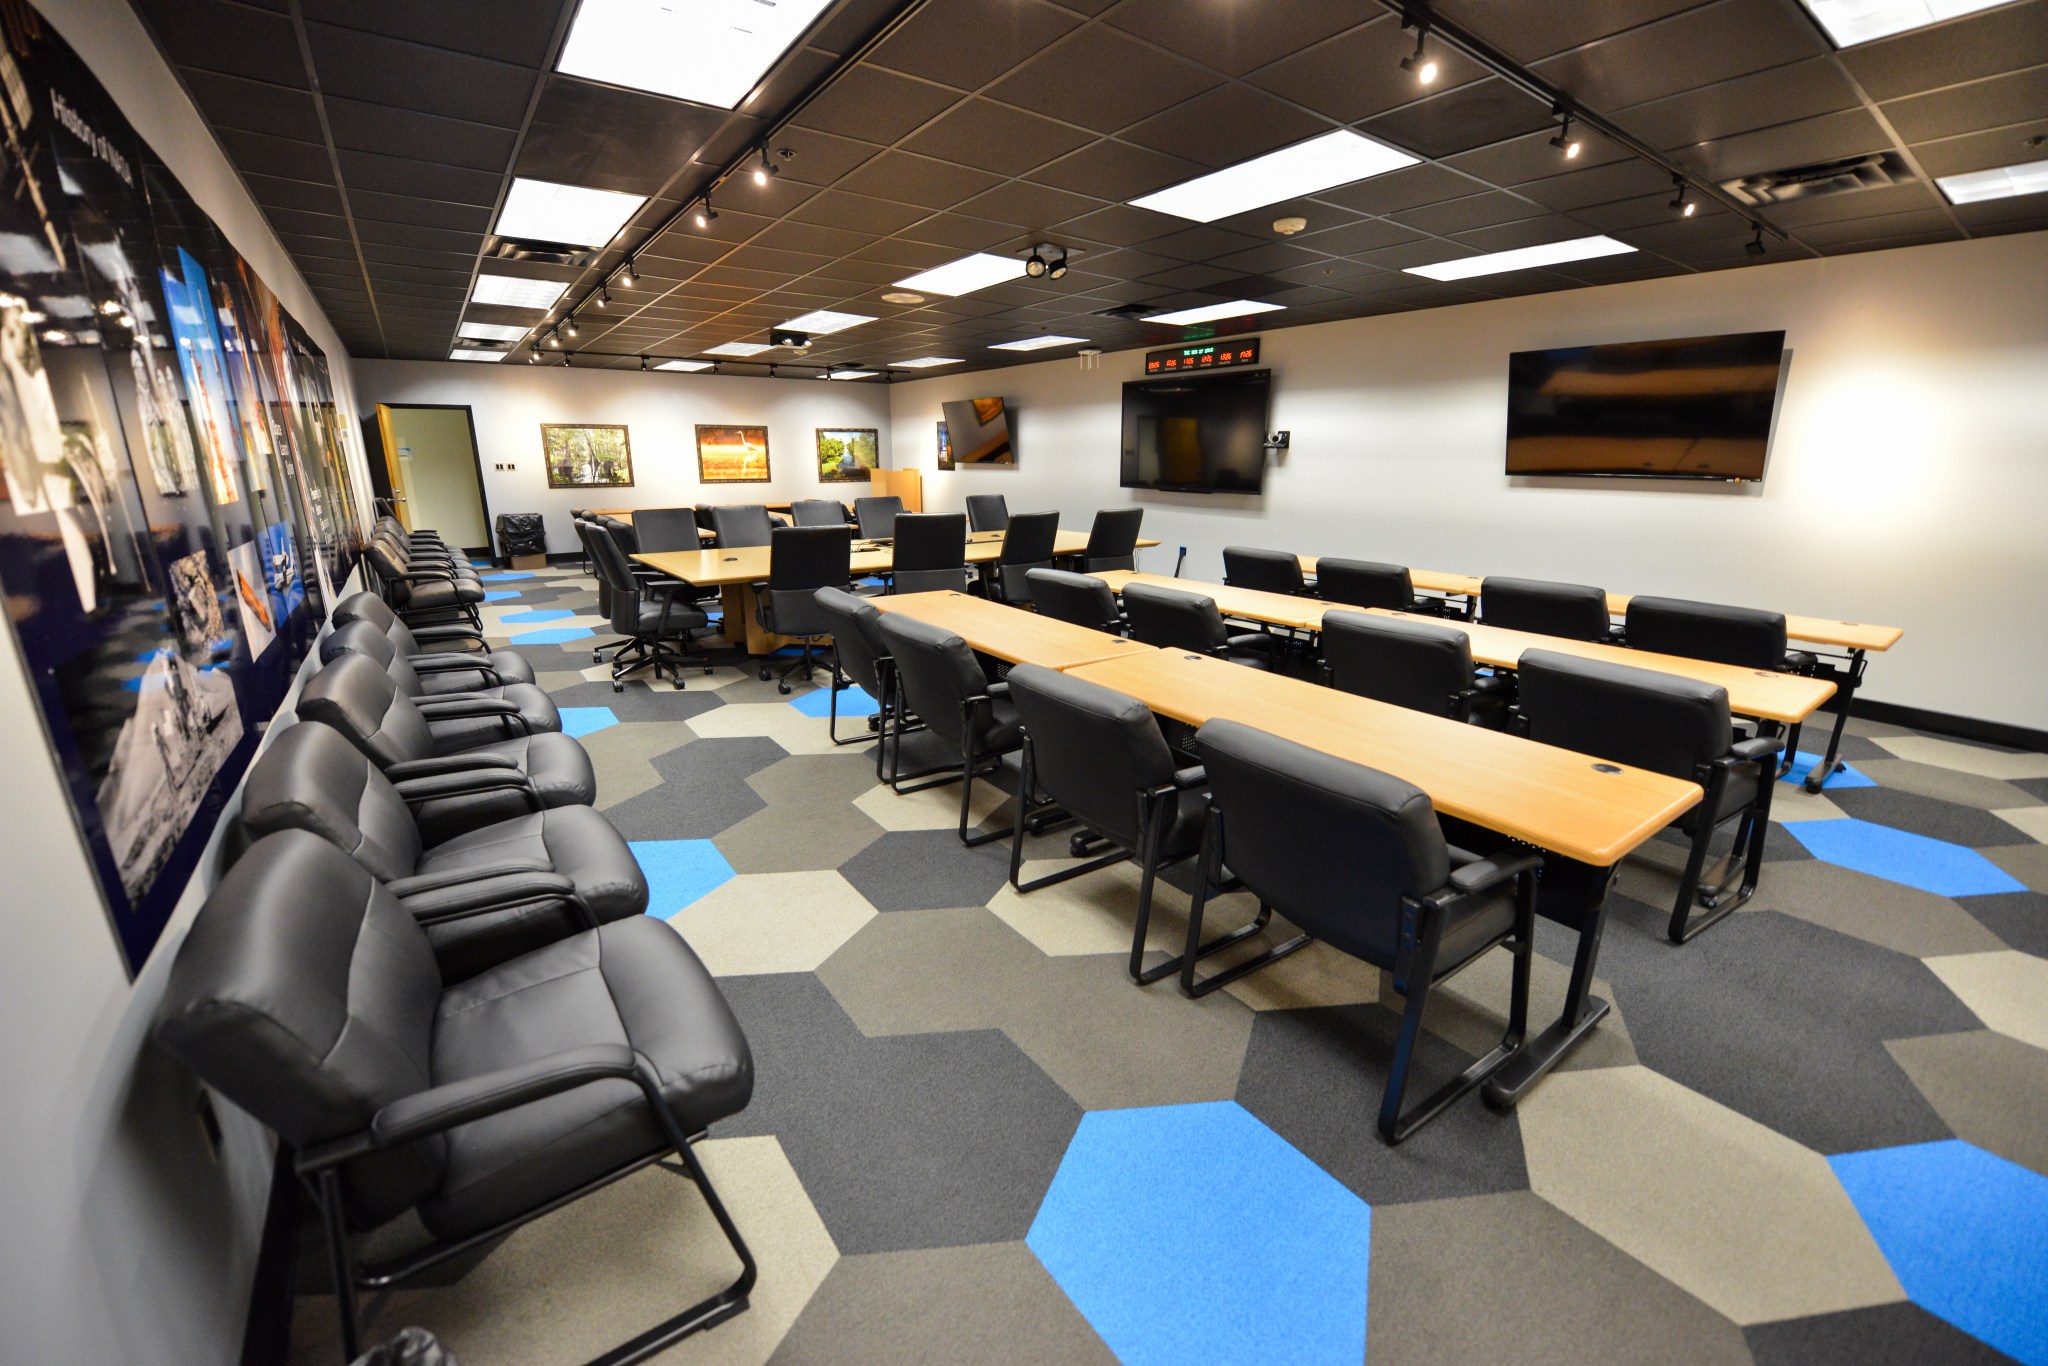 The EC40 conference room in building 101 at the Michoud Assembly Facility.